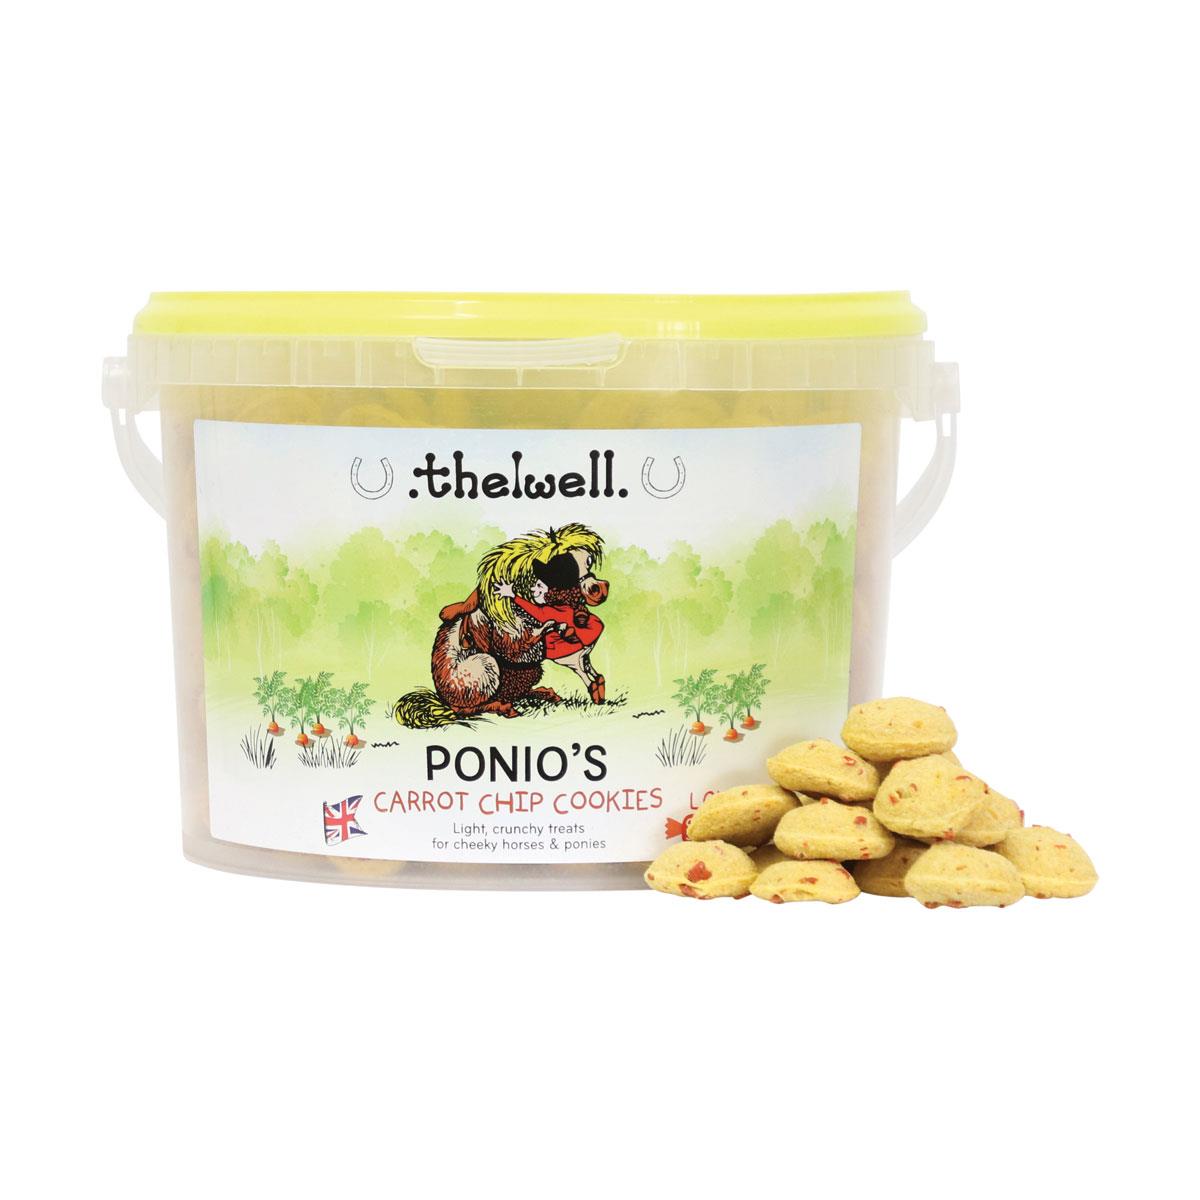 Thelwell Ponio Treats, carrot-chip cookies for horses